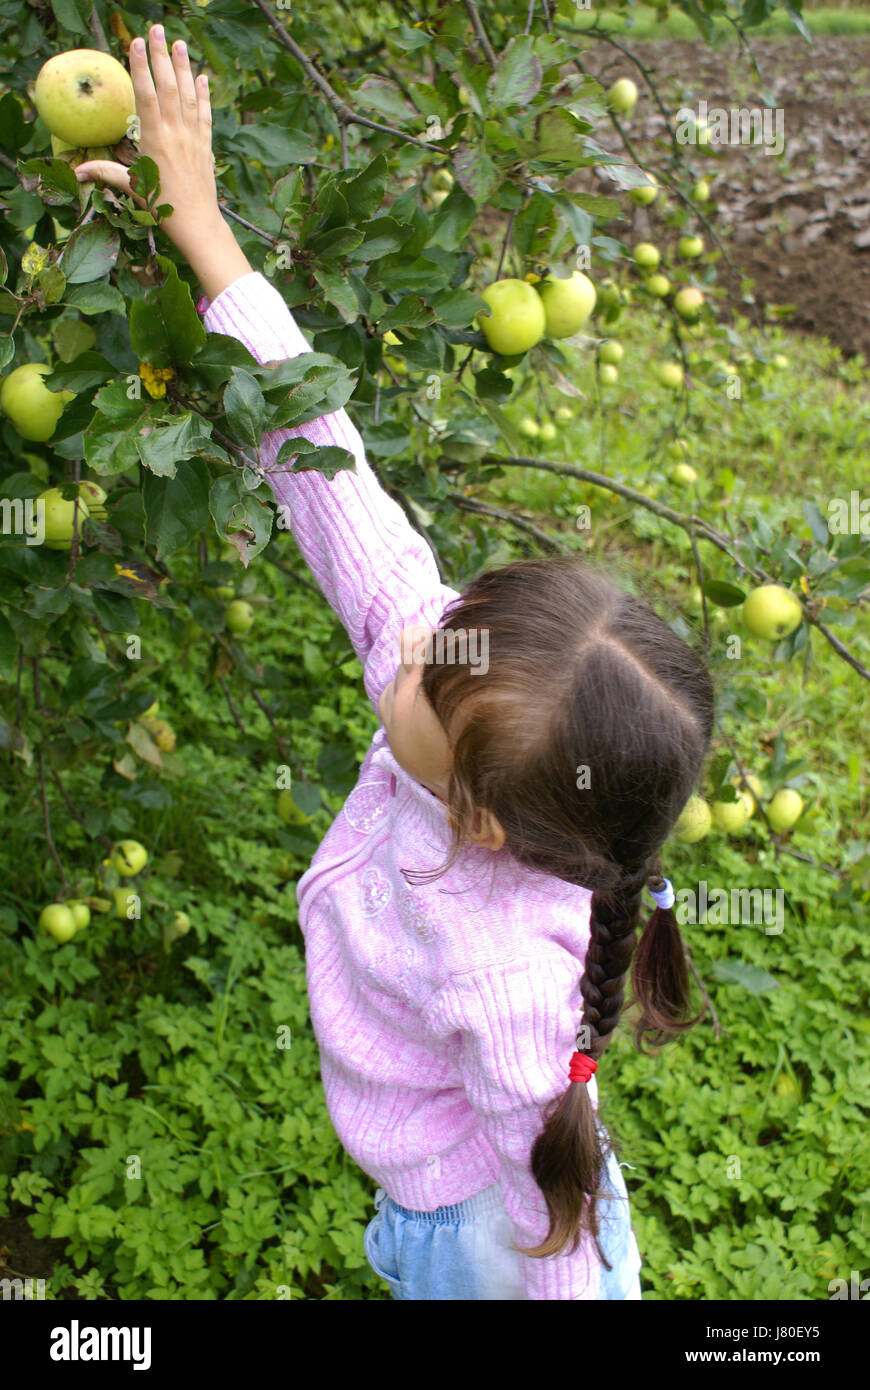 country childhood child apple fall autumn pick life exist existence living Stock Photo